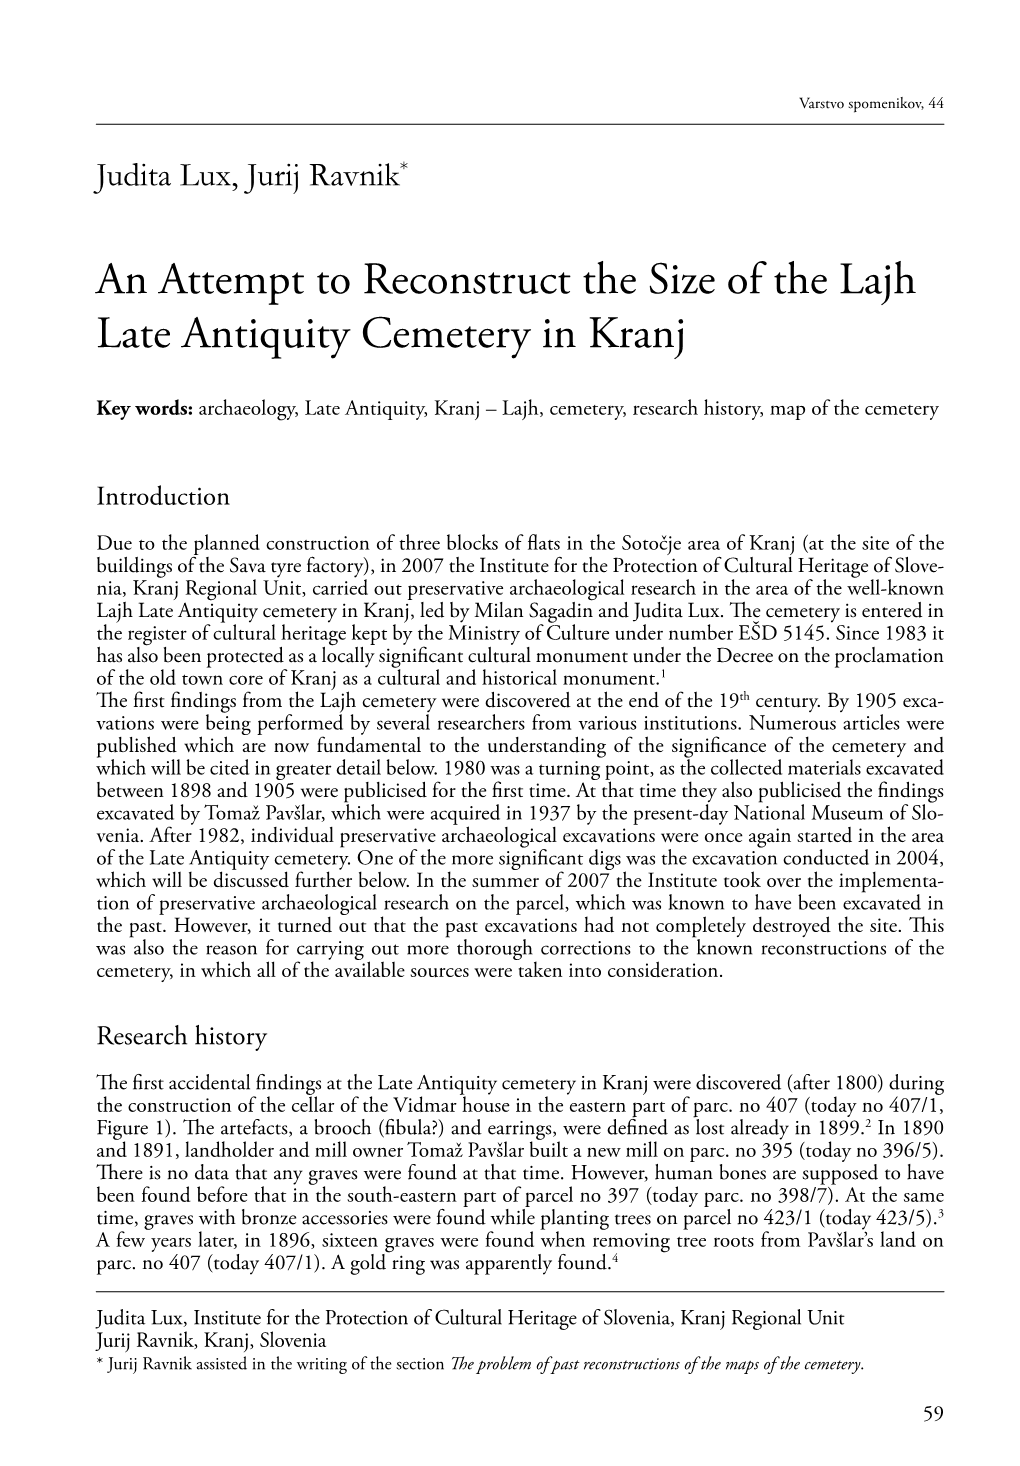 An Attempt to Reconstruct the Size of the Lajh Late Antiquity Cemetery in Kranj